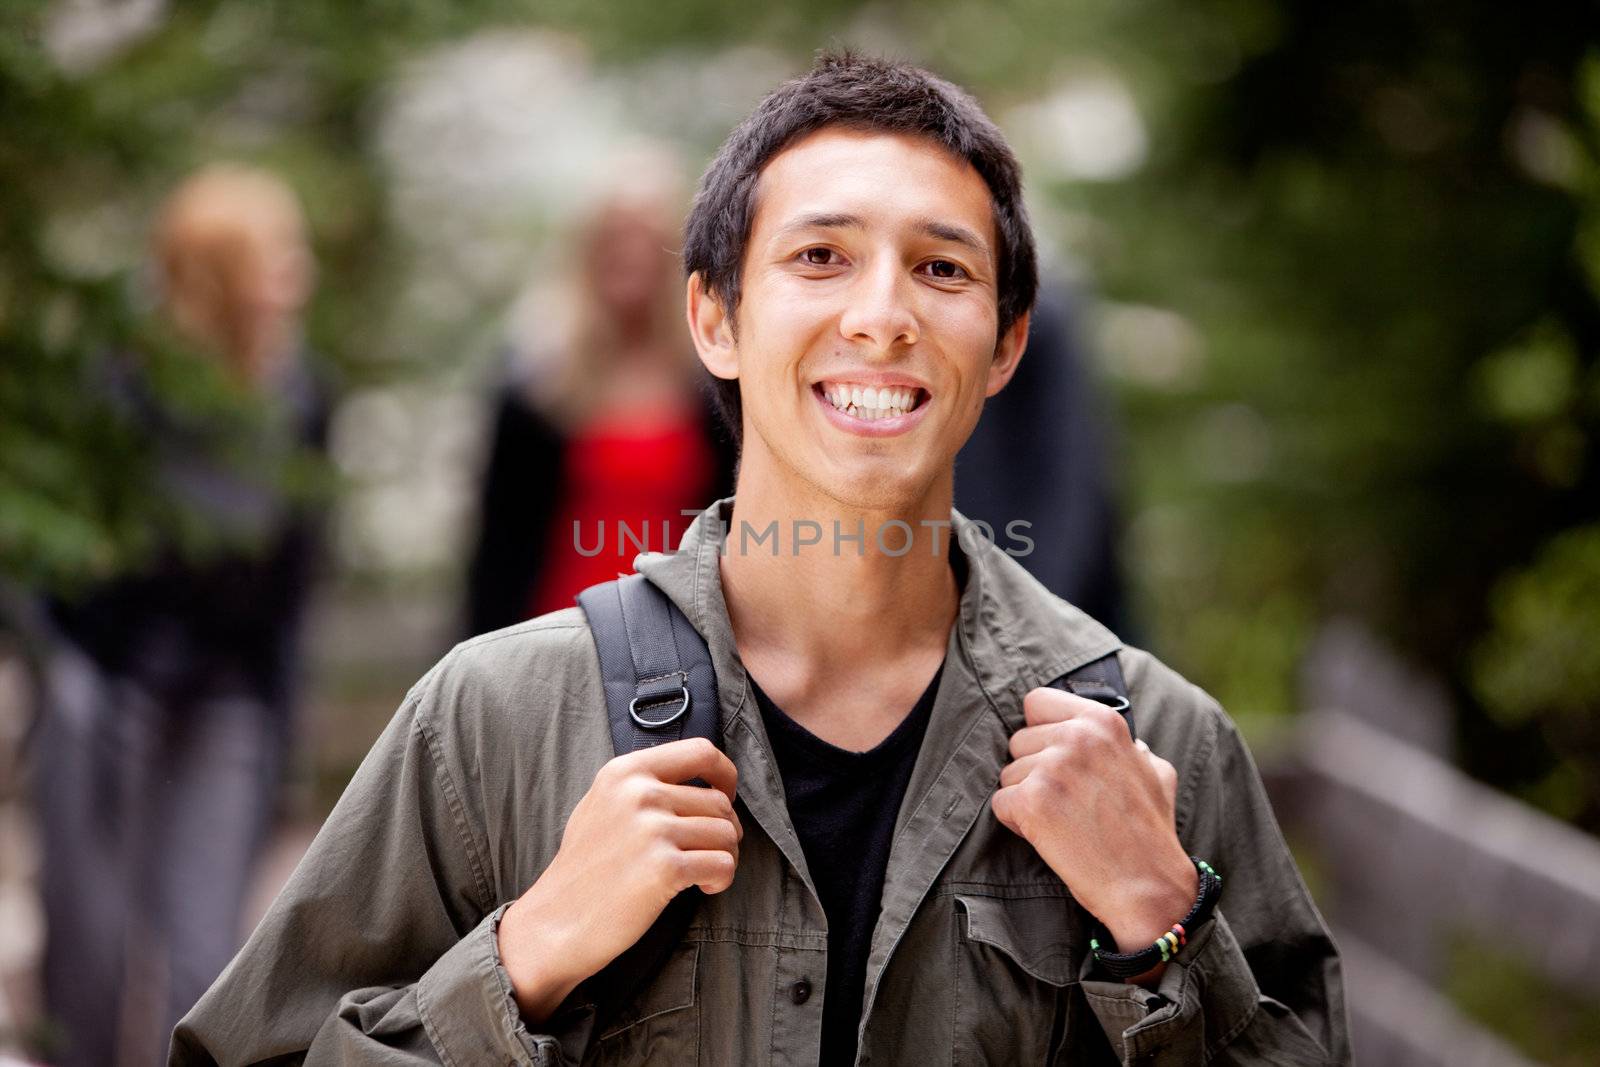 A happy camper smiling at the camera with a backpack outdoors